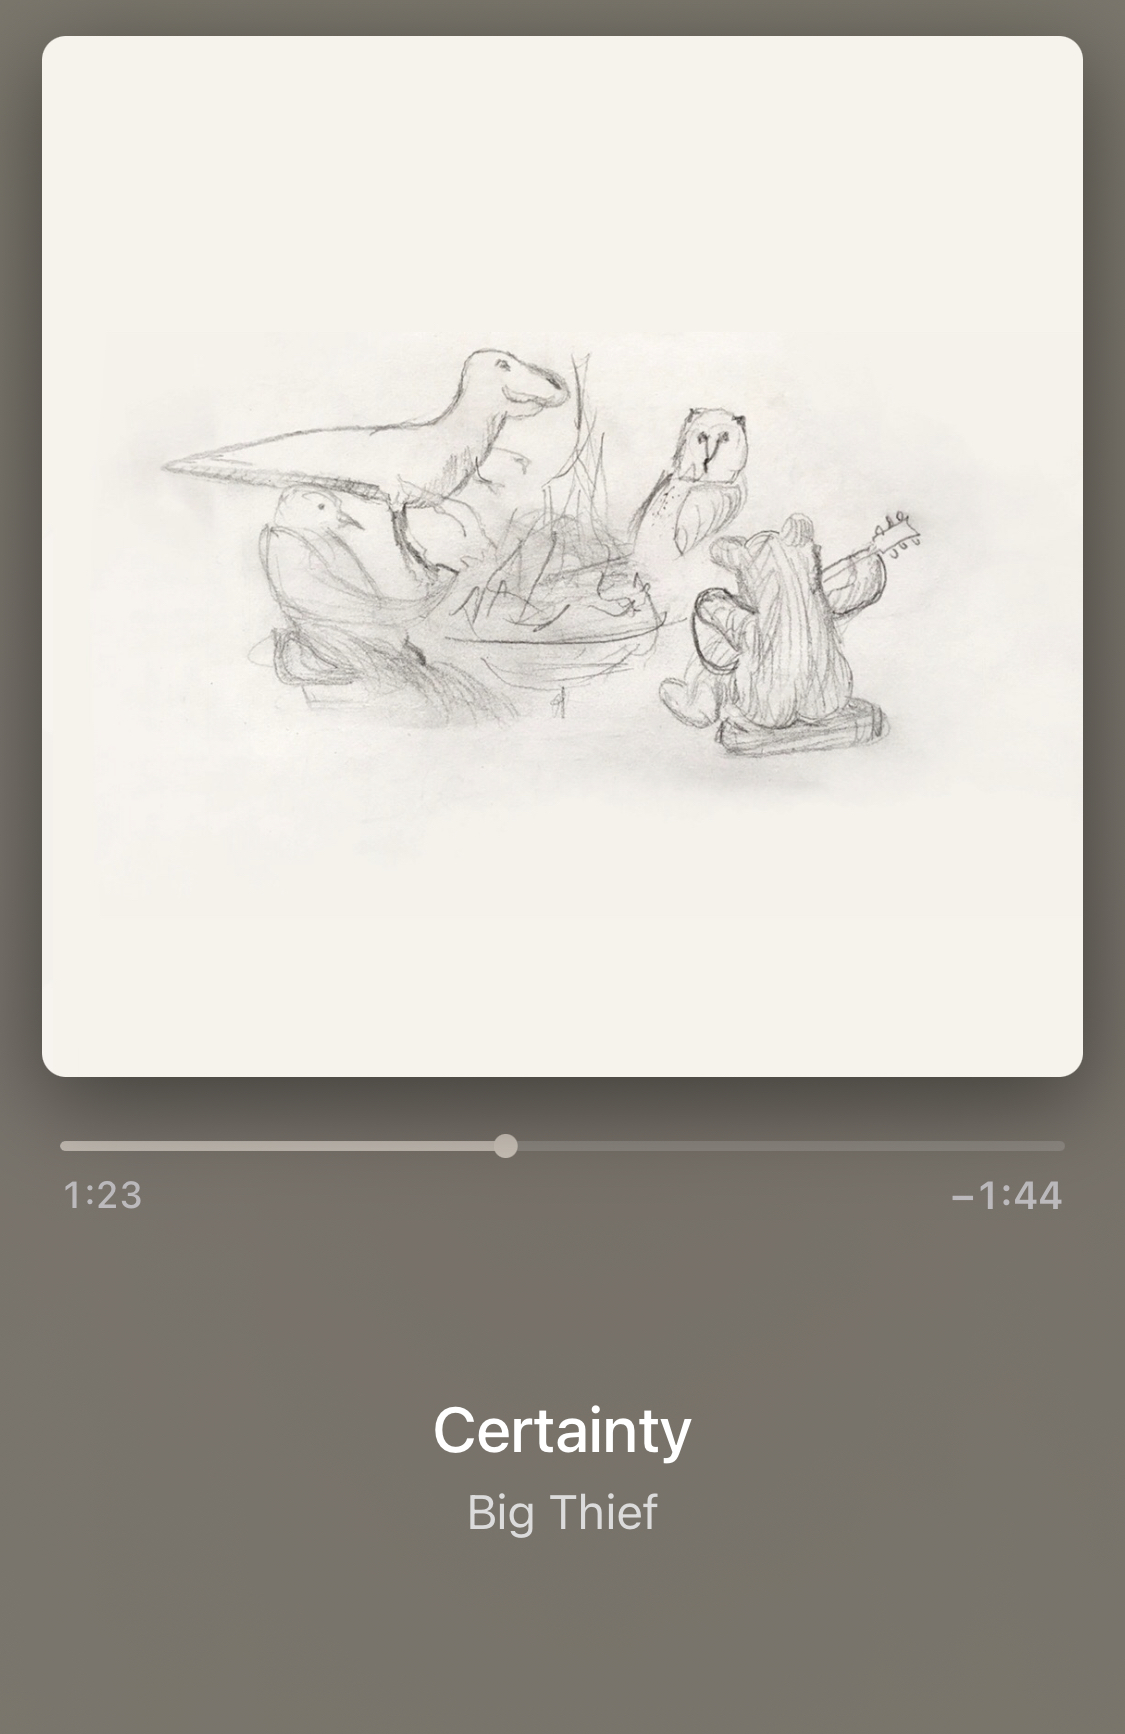 Image of an album cover showing the song titled Certainty. The album art is a pencil sketch of several animals including a dinosaur, sitting around a fire while a bear plays guitar.  